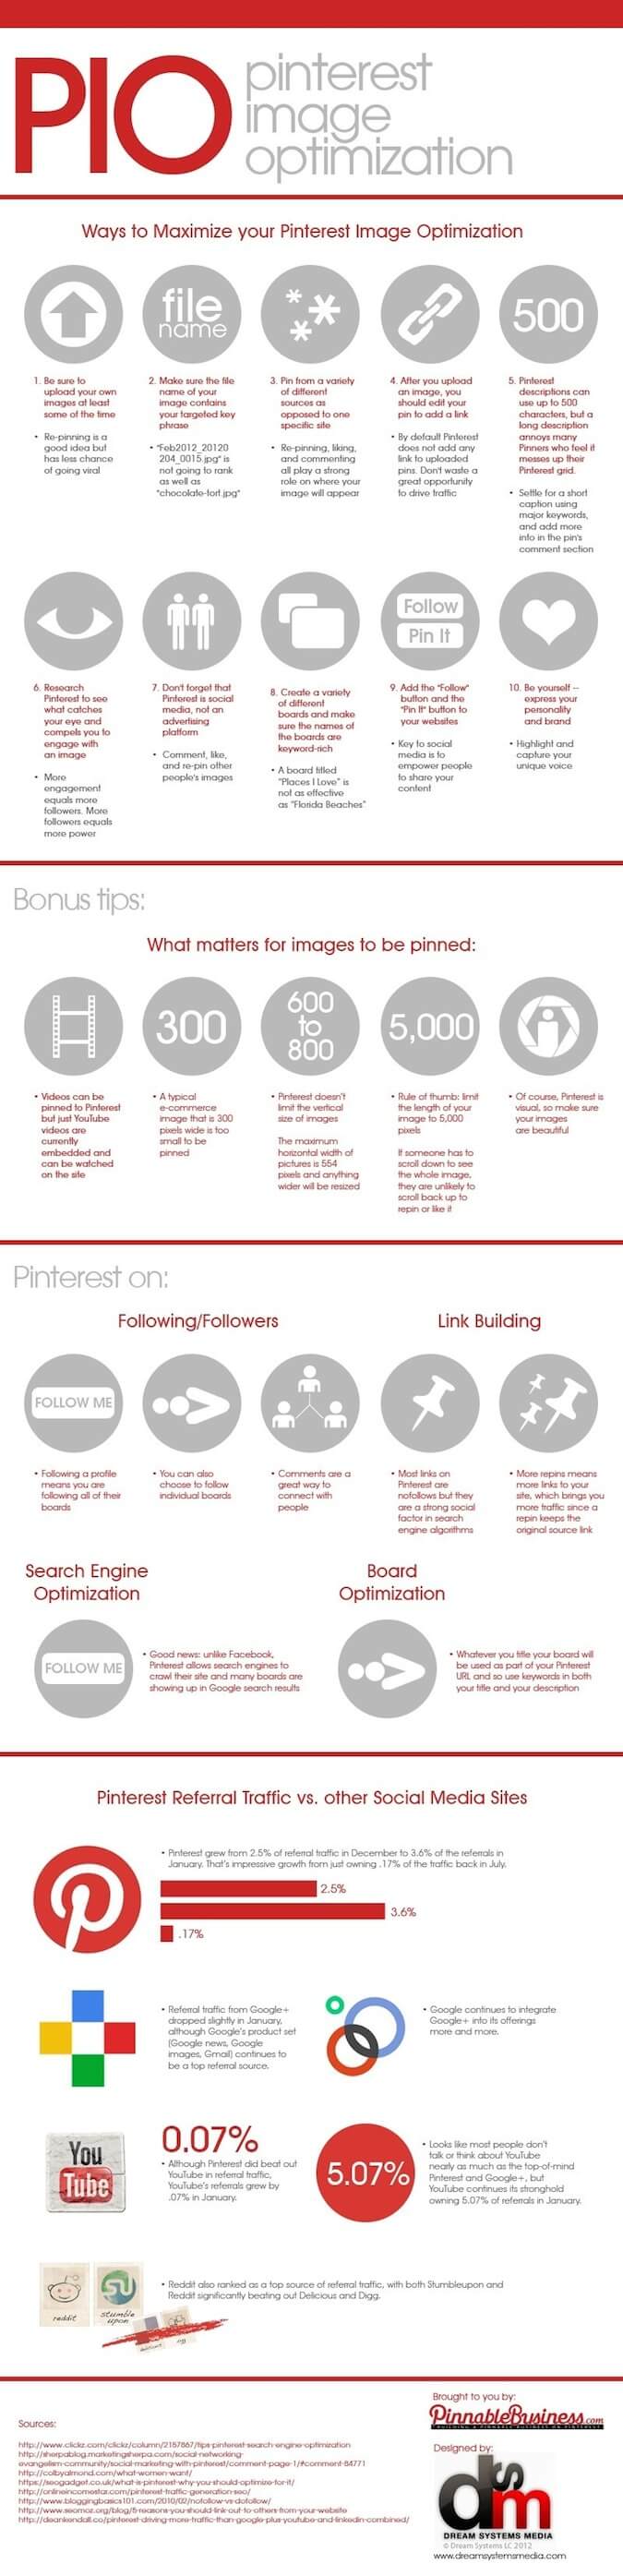 How to Use Pinterest More Effectively